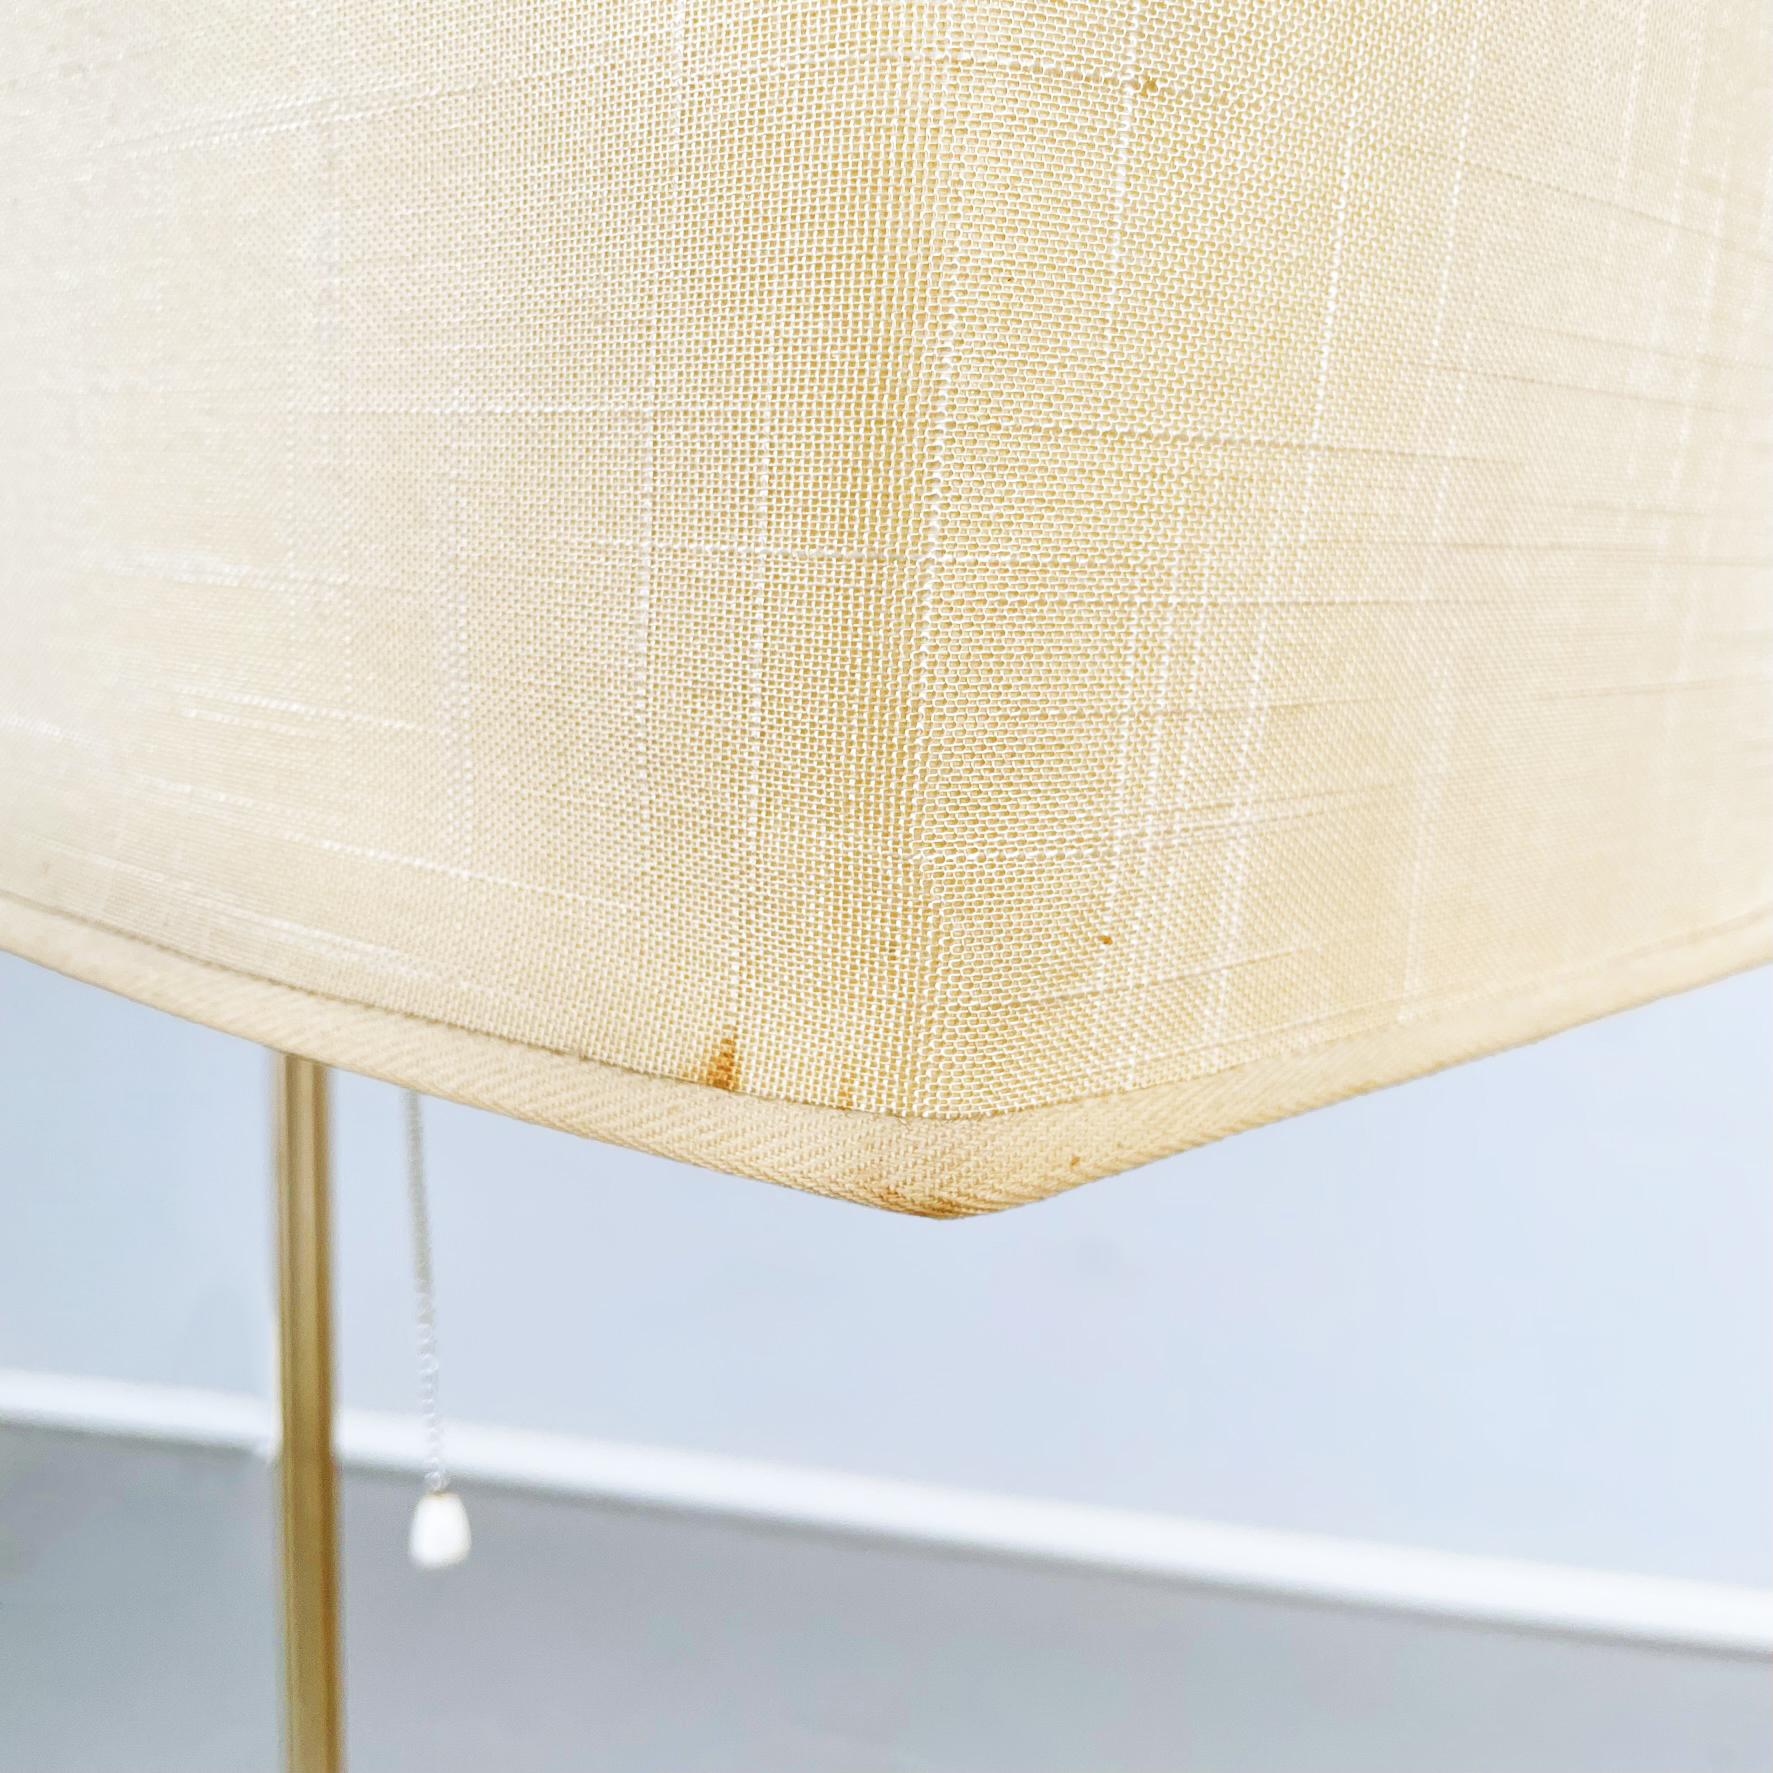 Italian Mid-Century Floor Lamp in Fabric, Leather and Brass by Stilnovo, 1970s For Sale 3